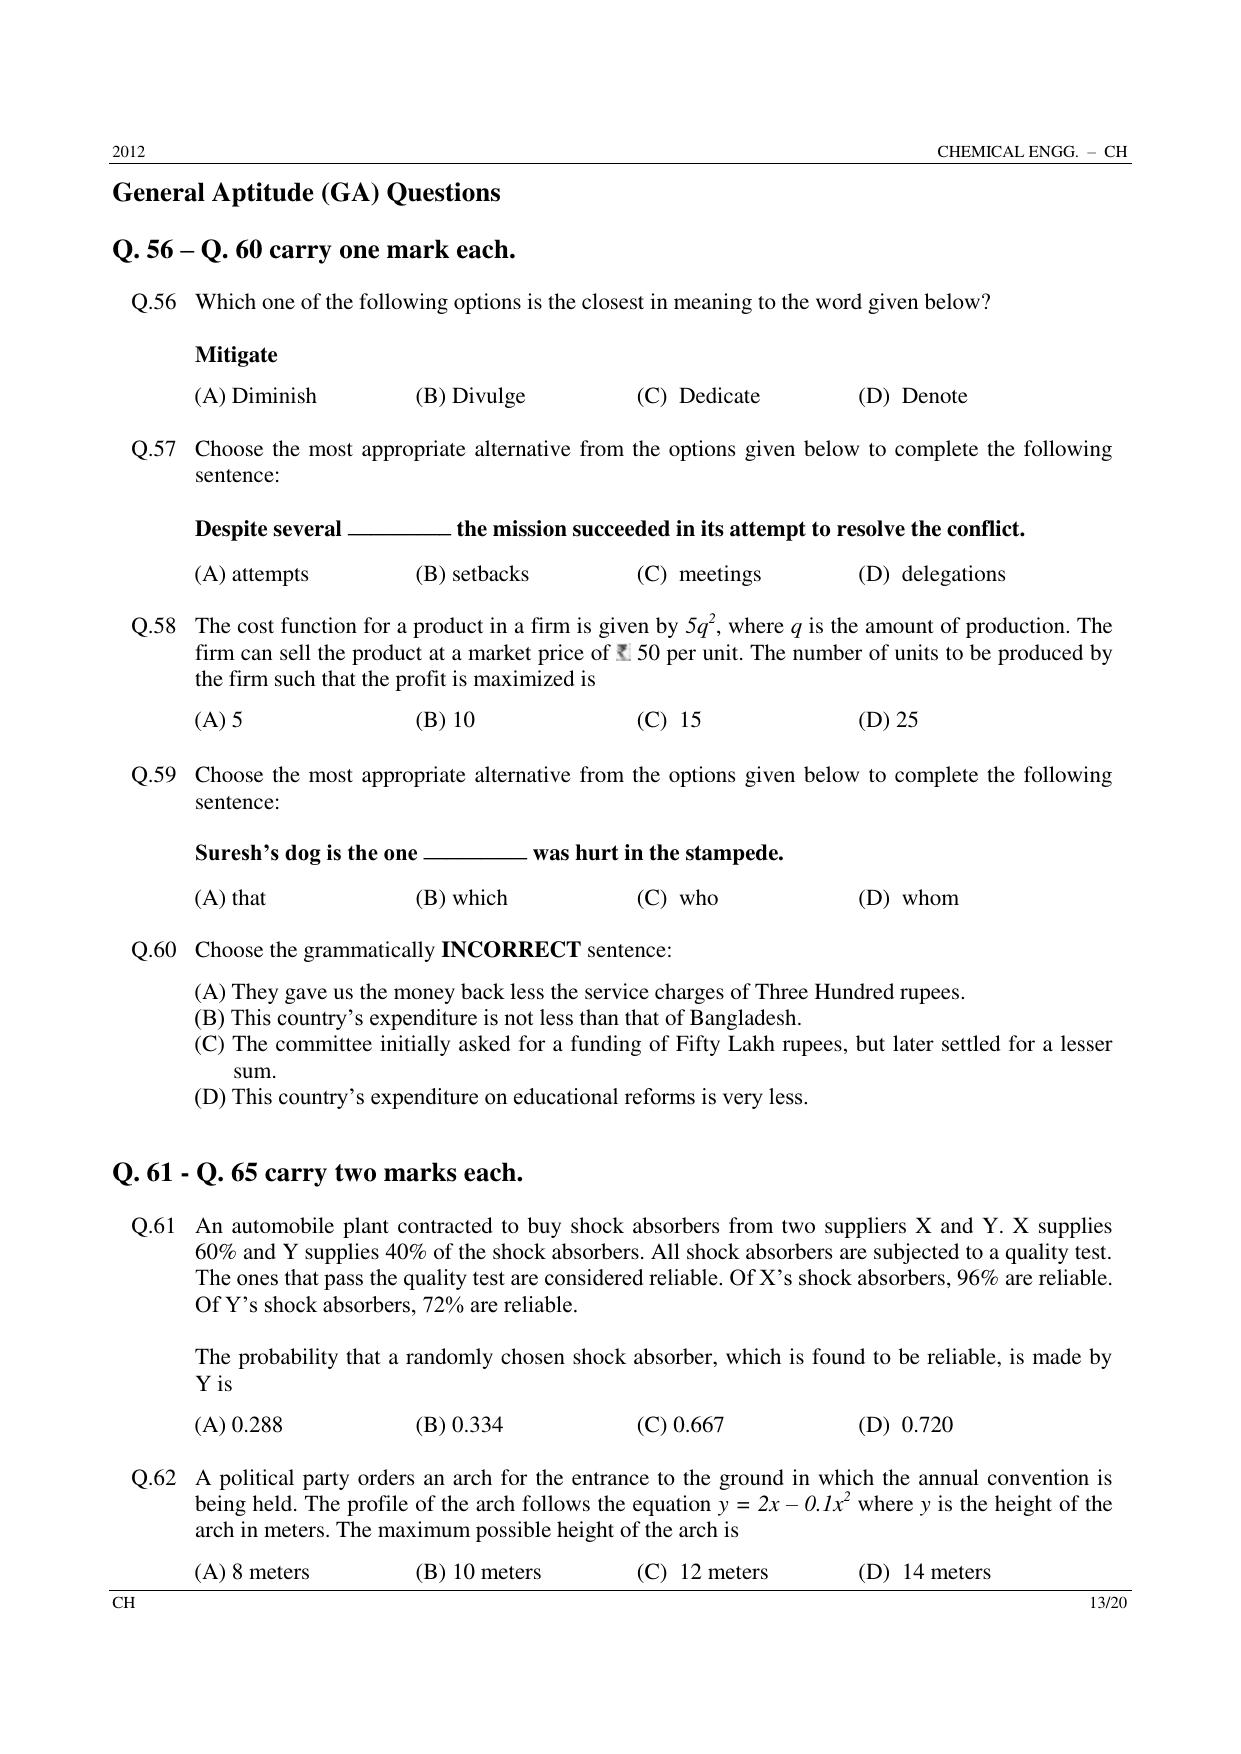 GATE 2012 Chemical Engineering (CH) Question Paper with Answer Key - Page 13